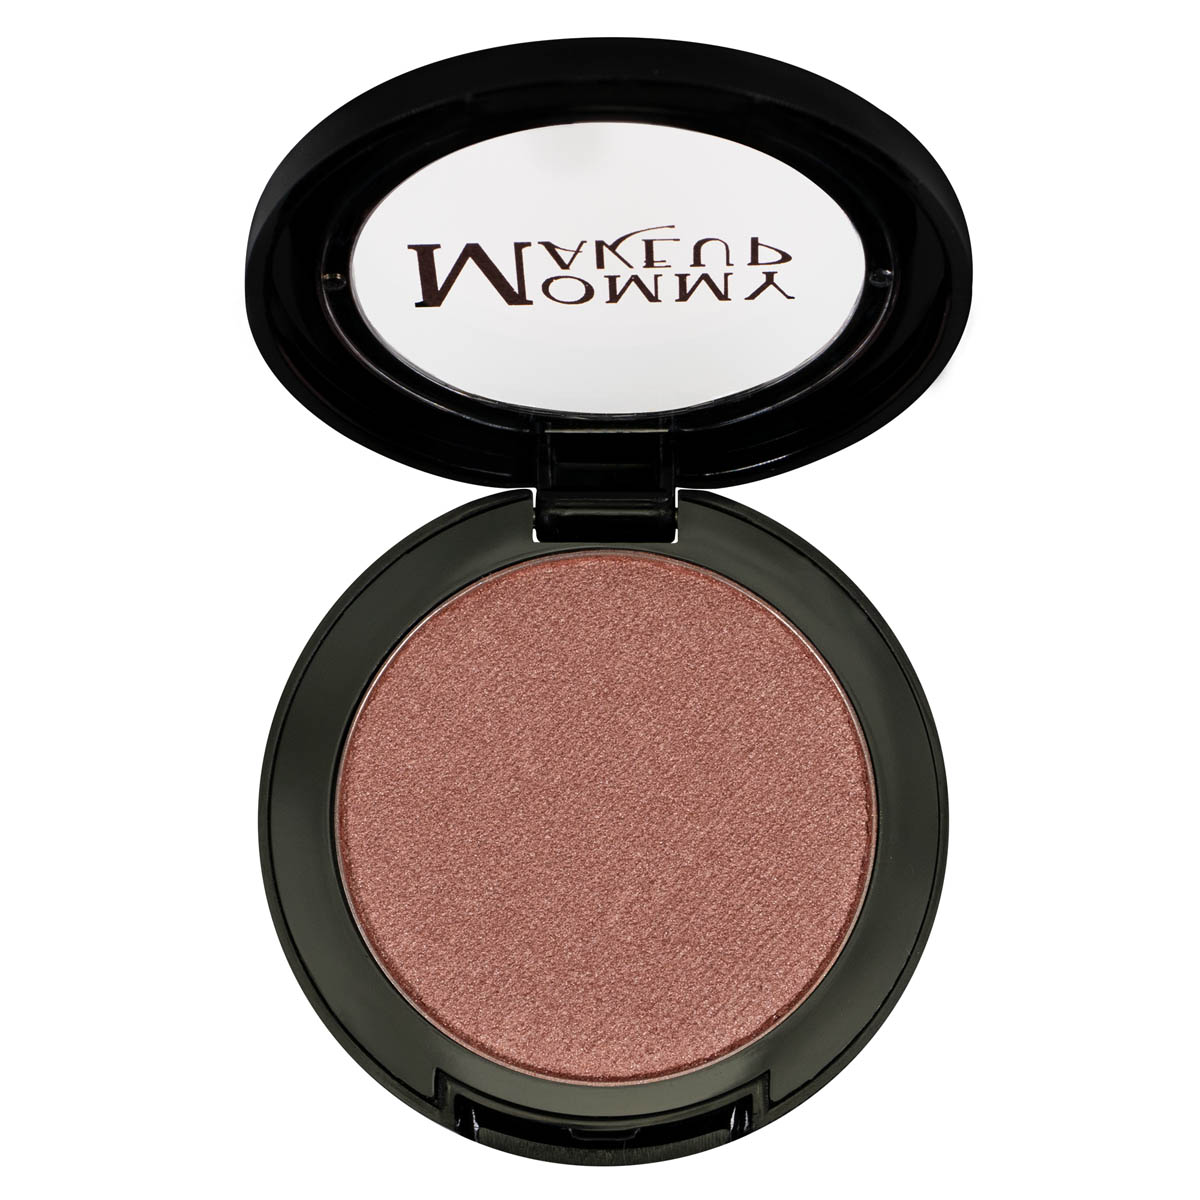 Powder Perfect Color Mineral Eyeshadow and Blush in Pink Mocha - a neutral “muddy” pink with a golden gleam